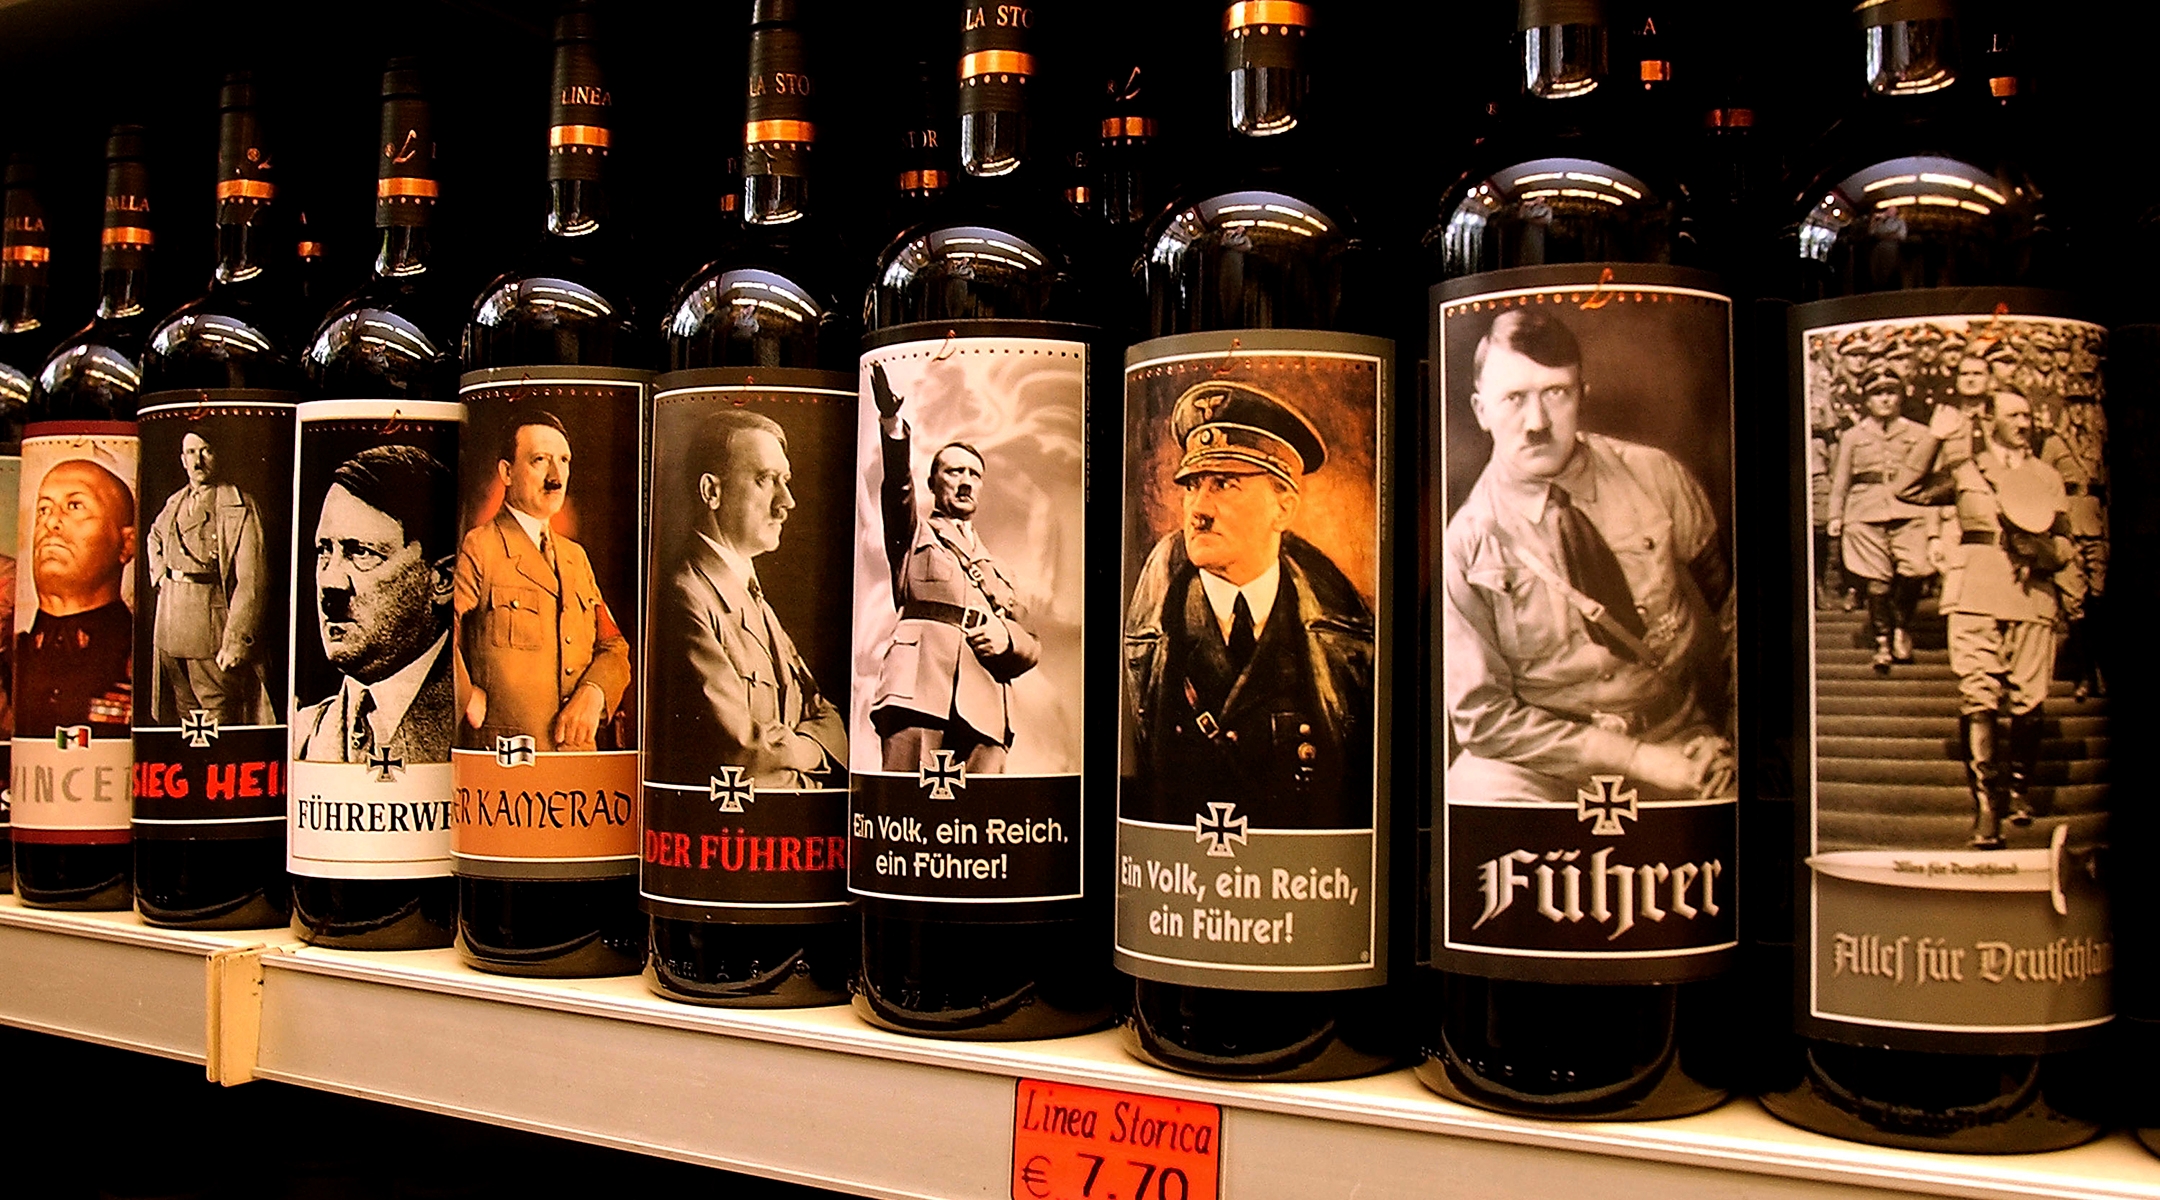 Bottles of Lunardelli Wine with labels depicting Nazi leader Adolf Hitler are displayed on a shelf in a wine shop near Venice, Sept. 12, 2003. (Giuseppe Cacace/Getty Images)